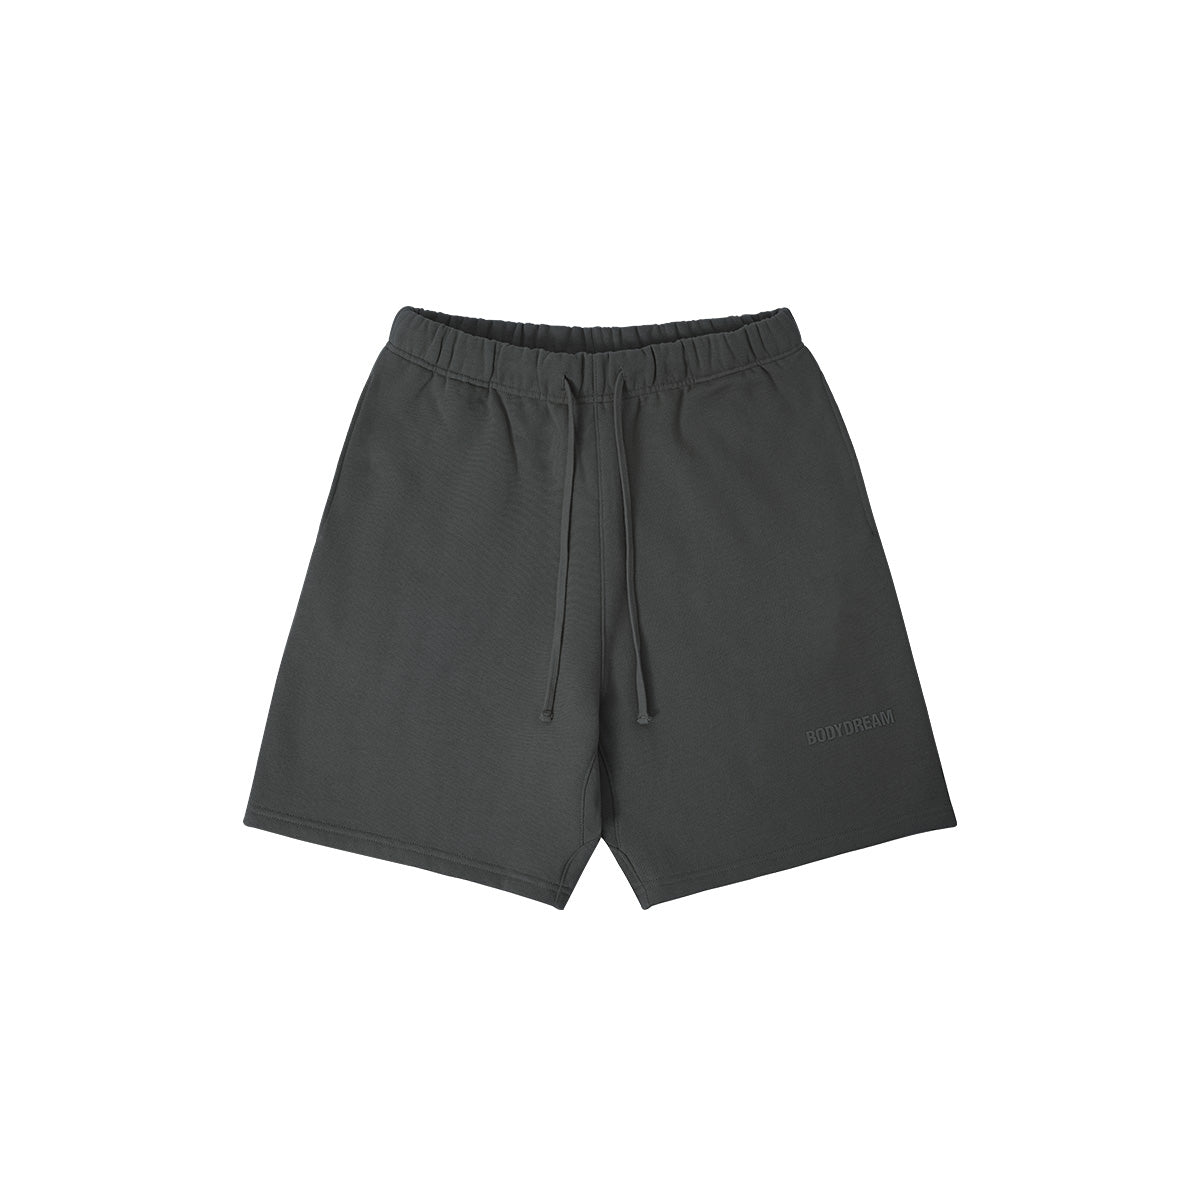 Relaxed Heavyweight Black Track Shorts - 0cm